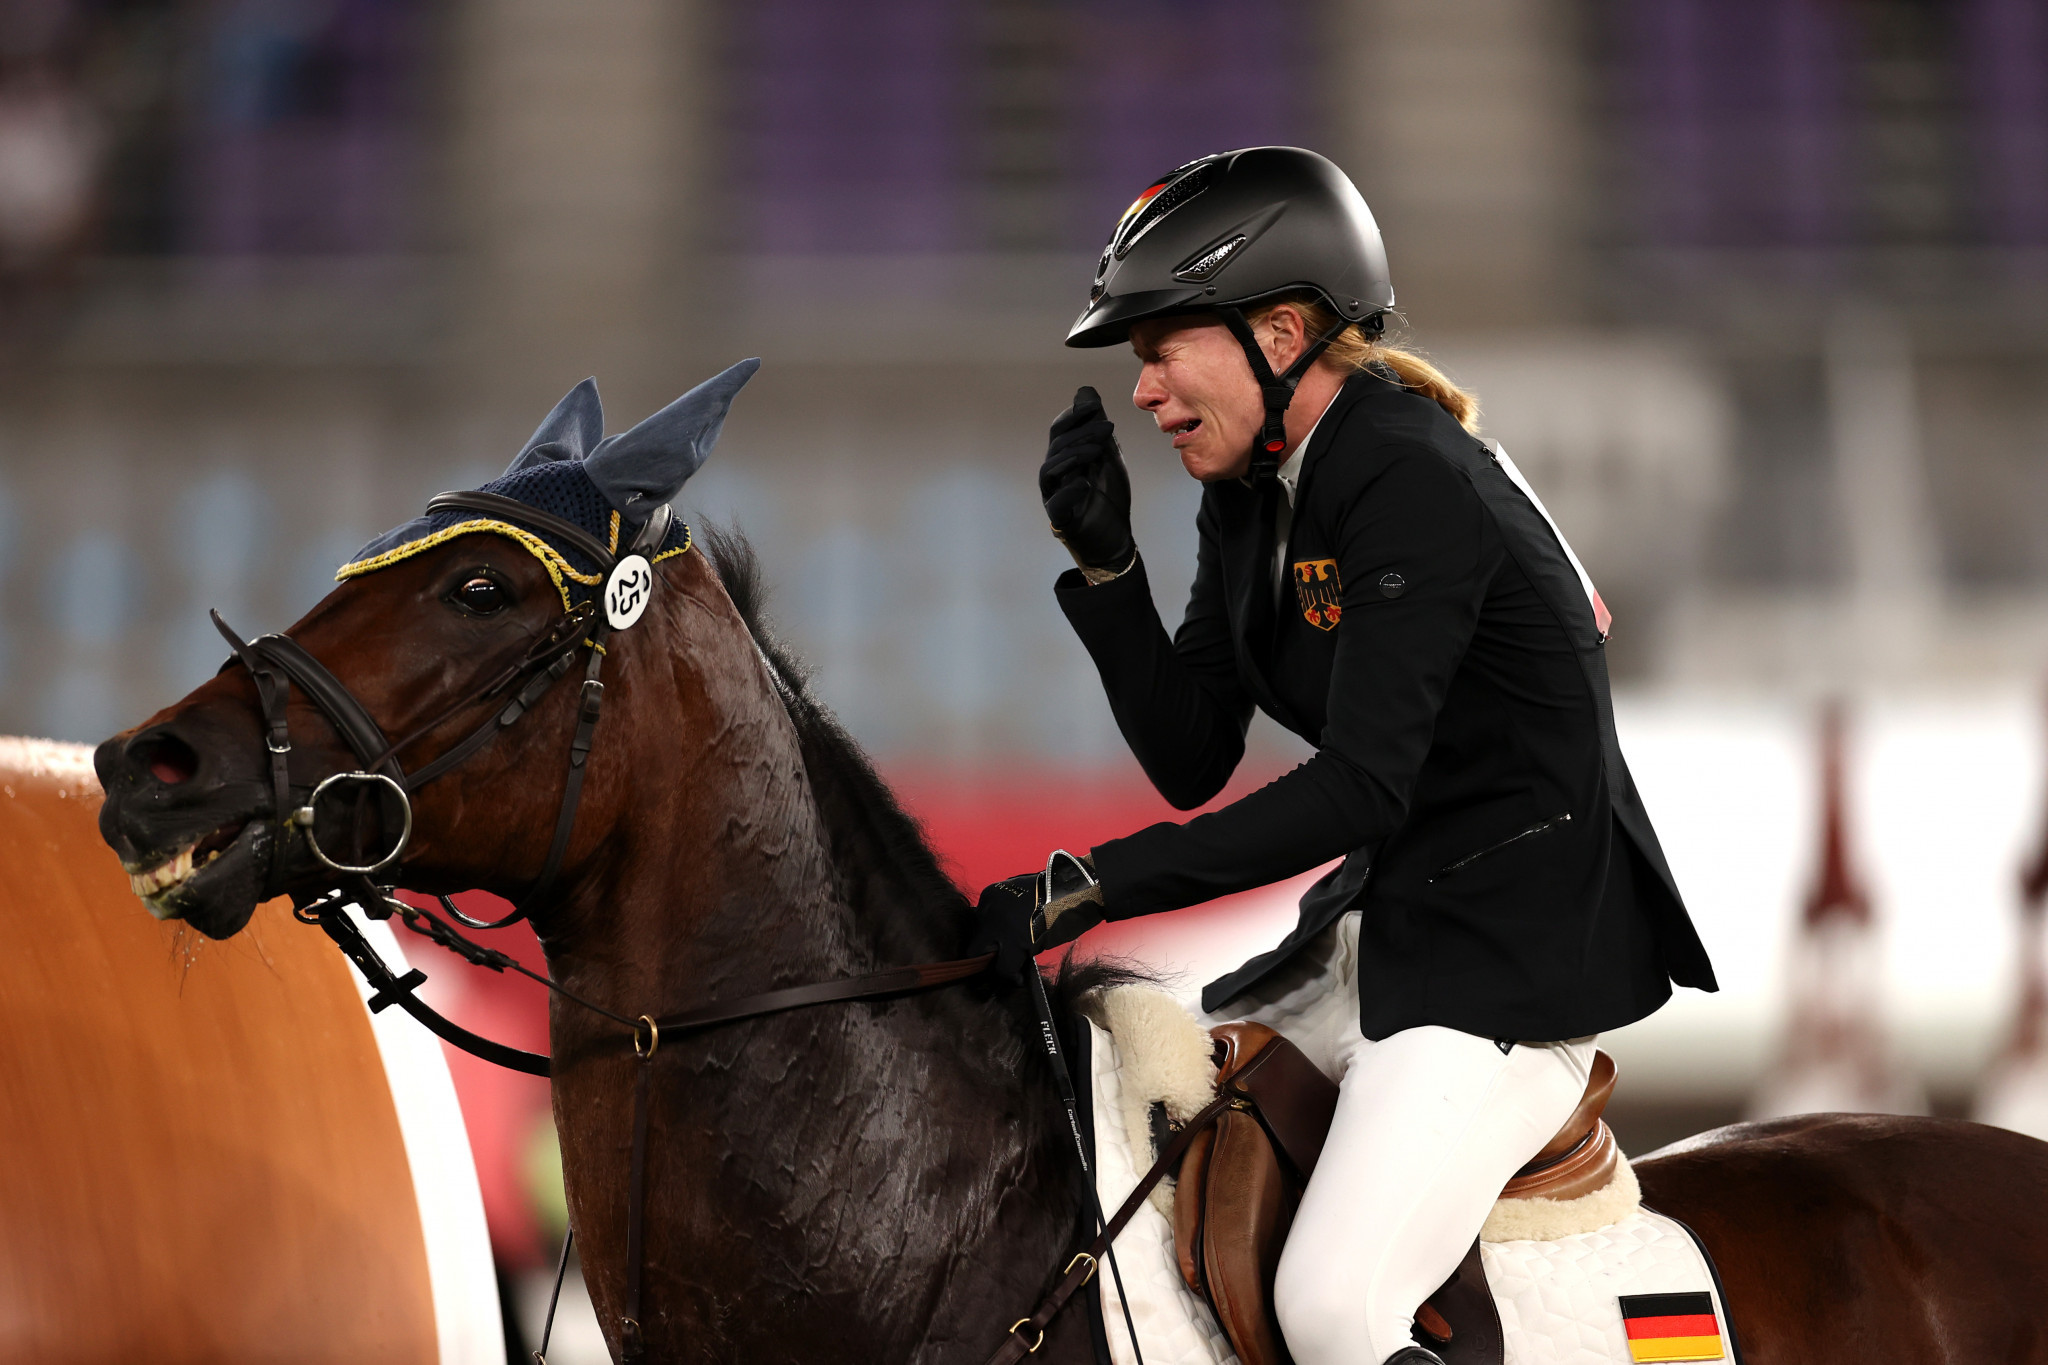 Germany's Annika Schleu broke down in tears after Saint Boy refused to jump in the riding event of the modern pentathlon ©Getty Images